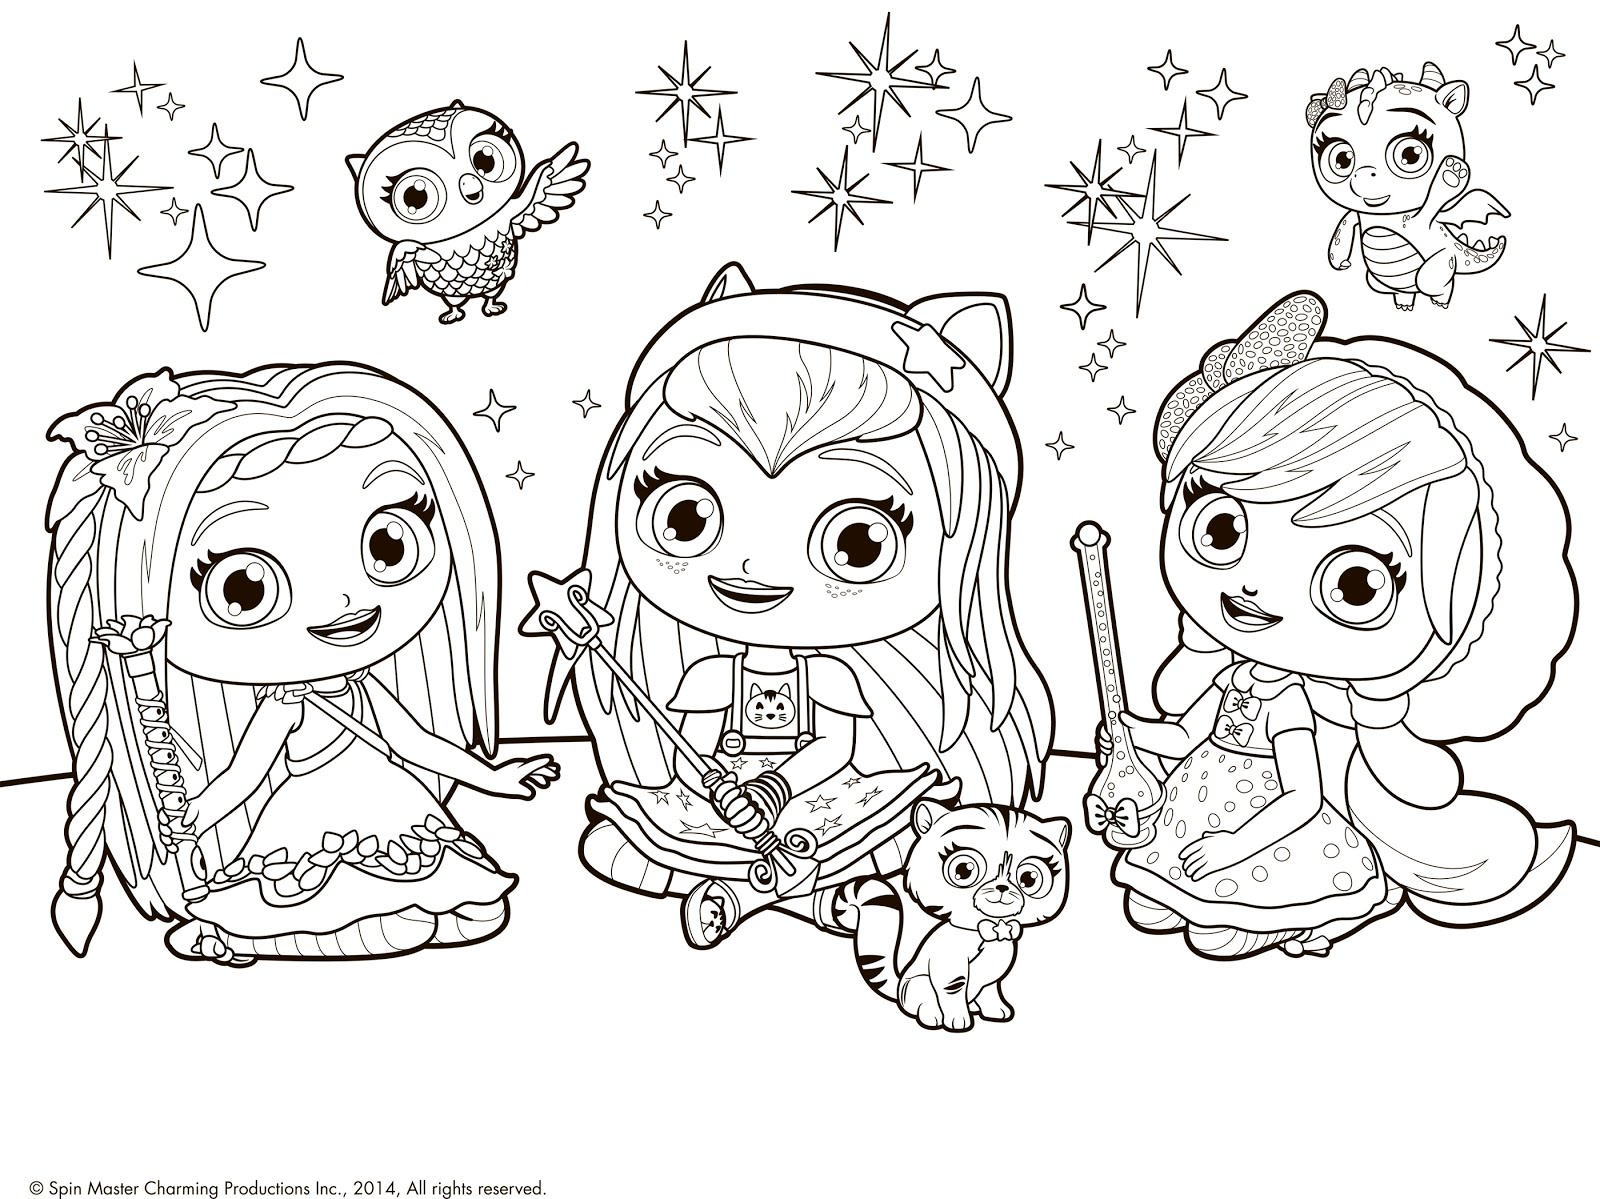 Little Charmers Coloring Pages at GetColorings.com | Free printable ...